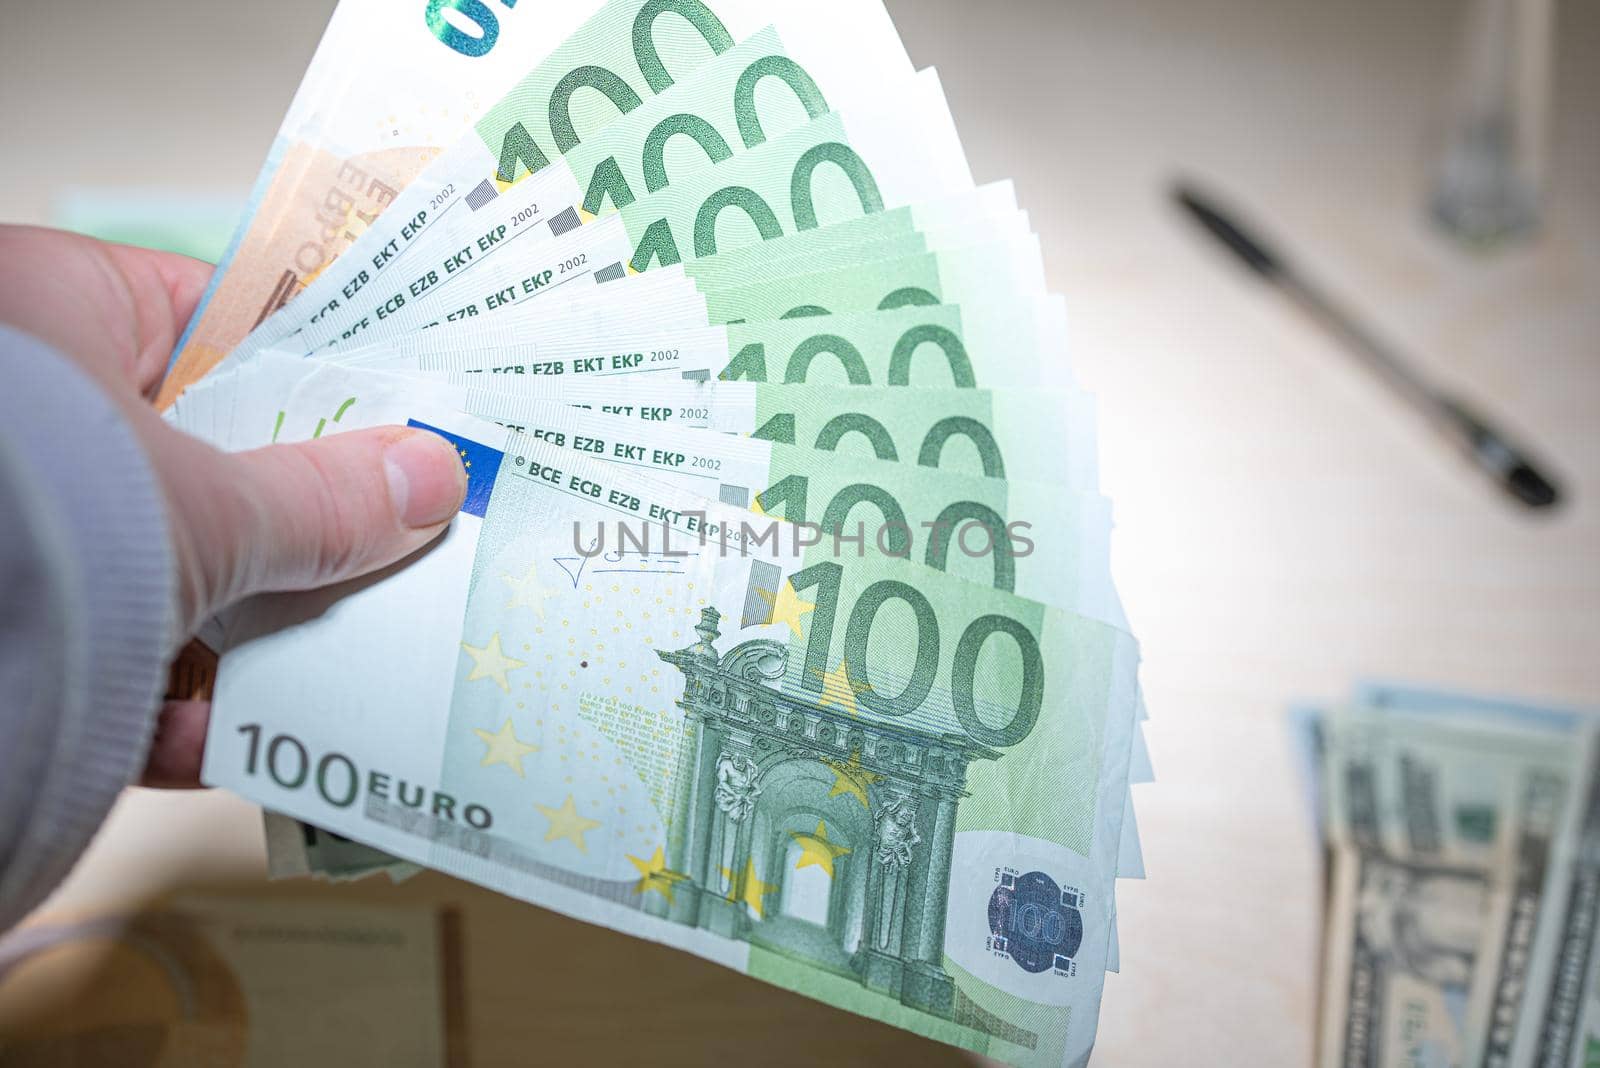 Heap of green houndred euro banknotes in the hand